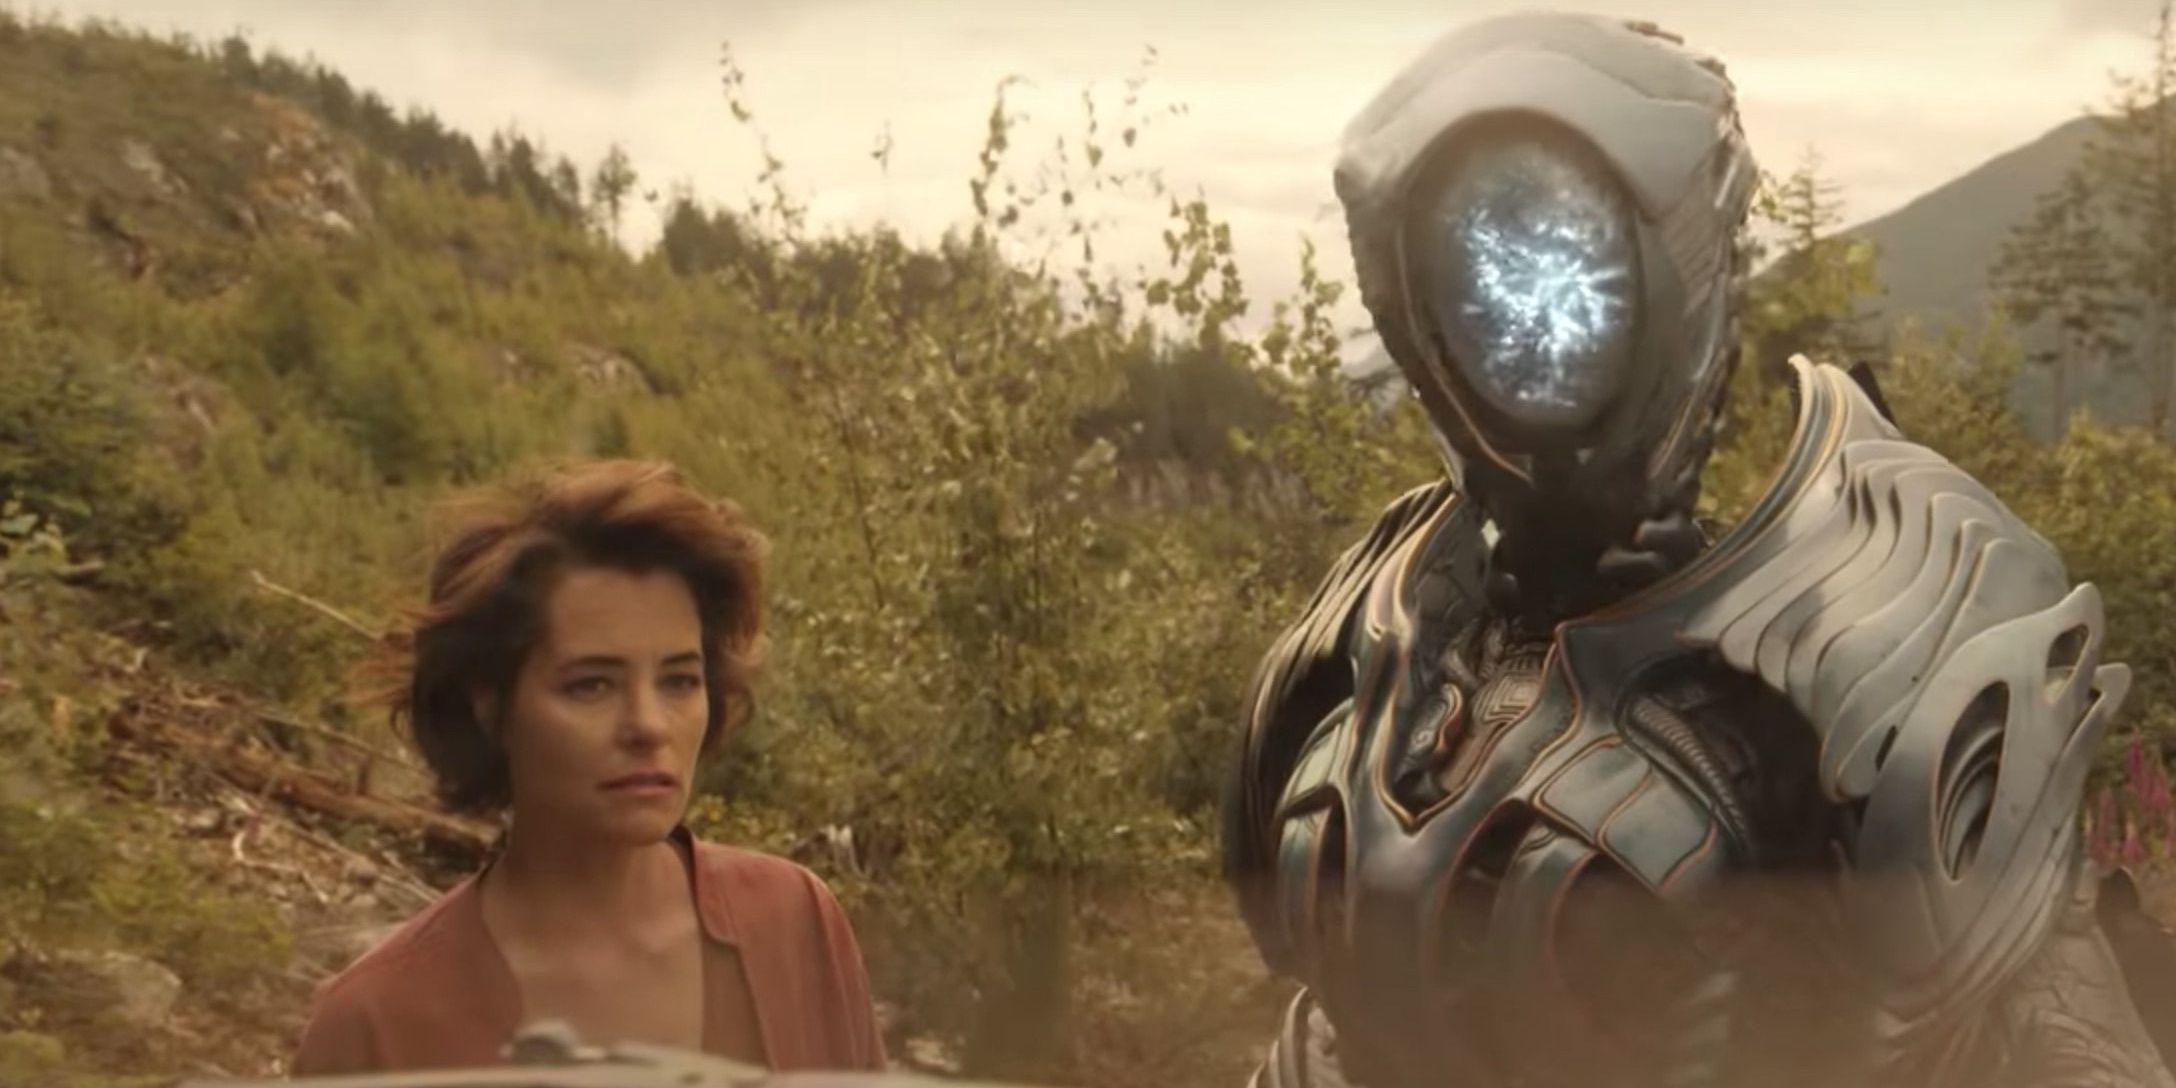 Doctor Smith hangs out with Robot in Lost In Space.